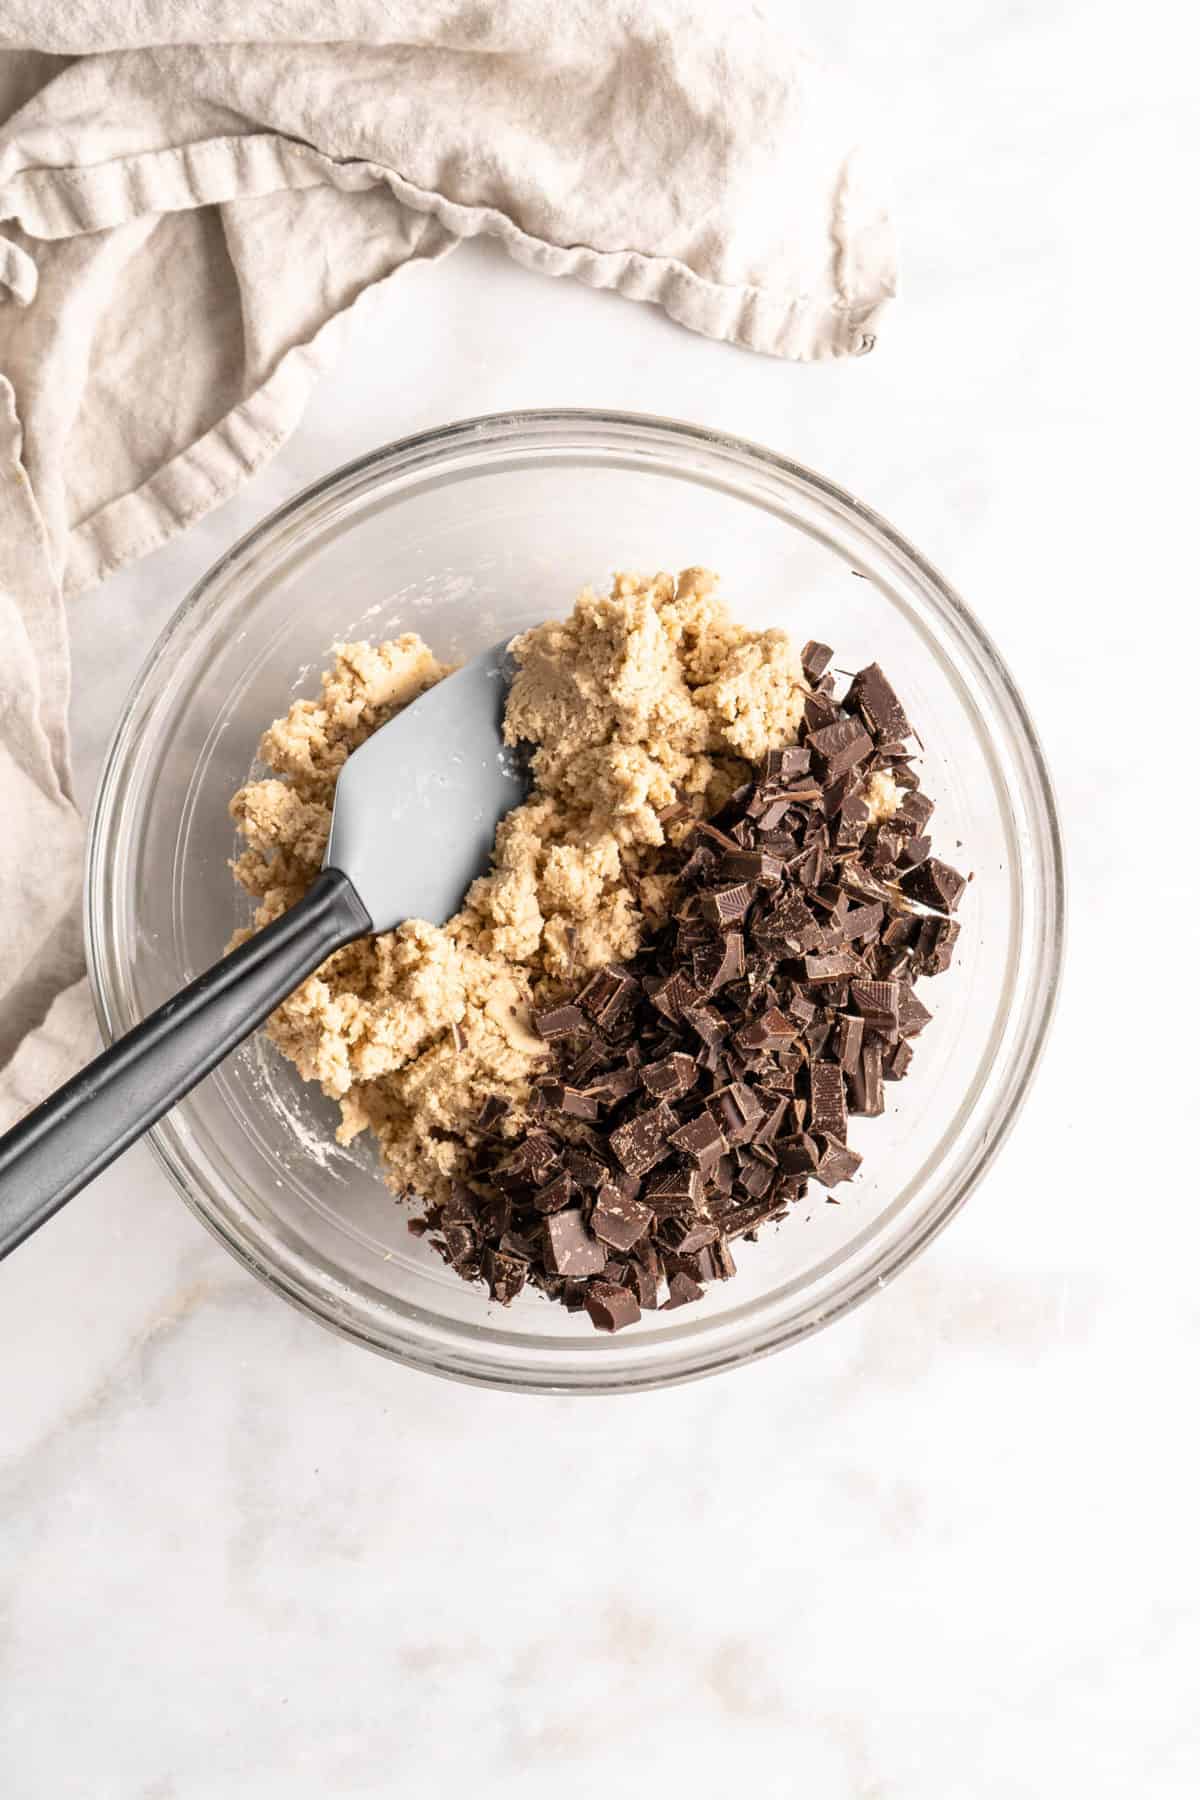 Cookie dough and chocolate chunks in glass bowl with spatula